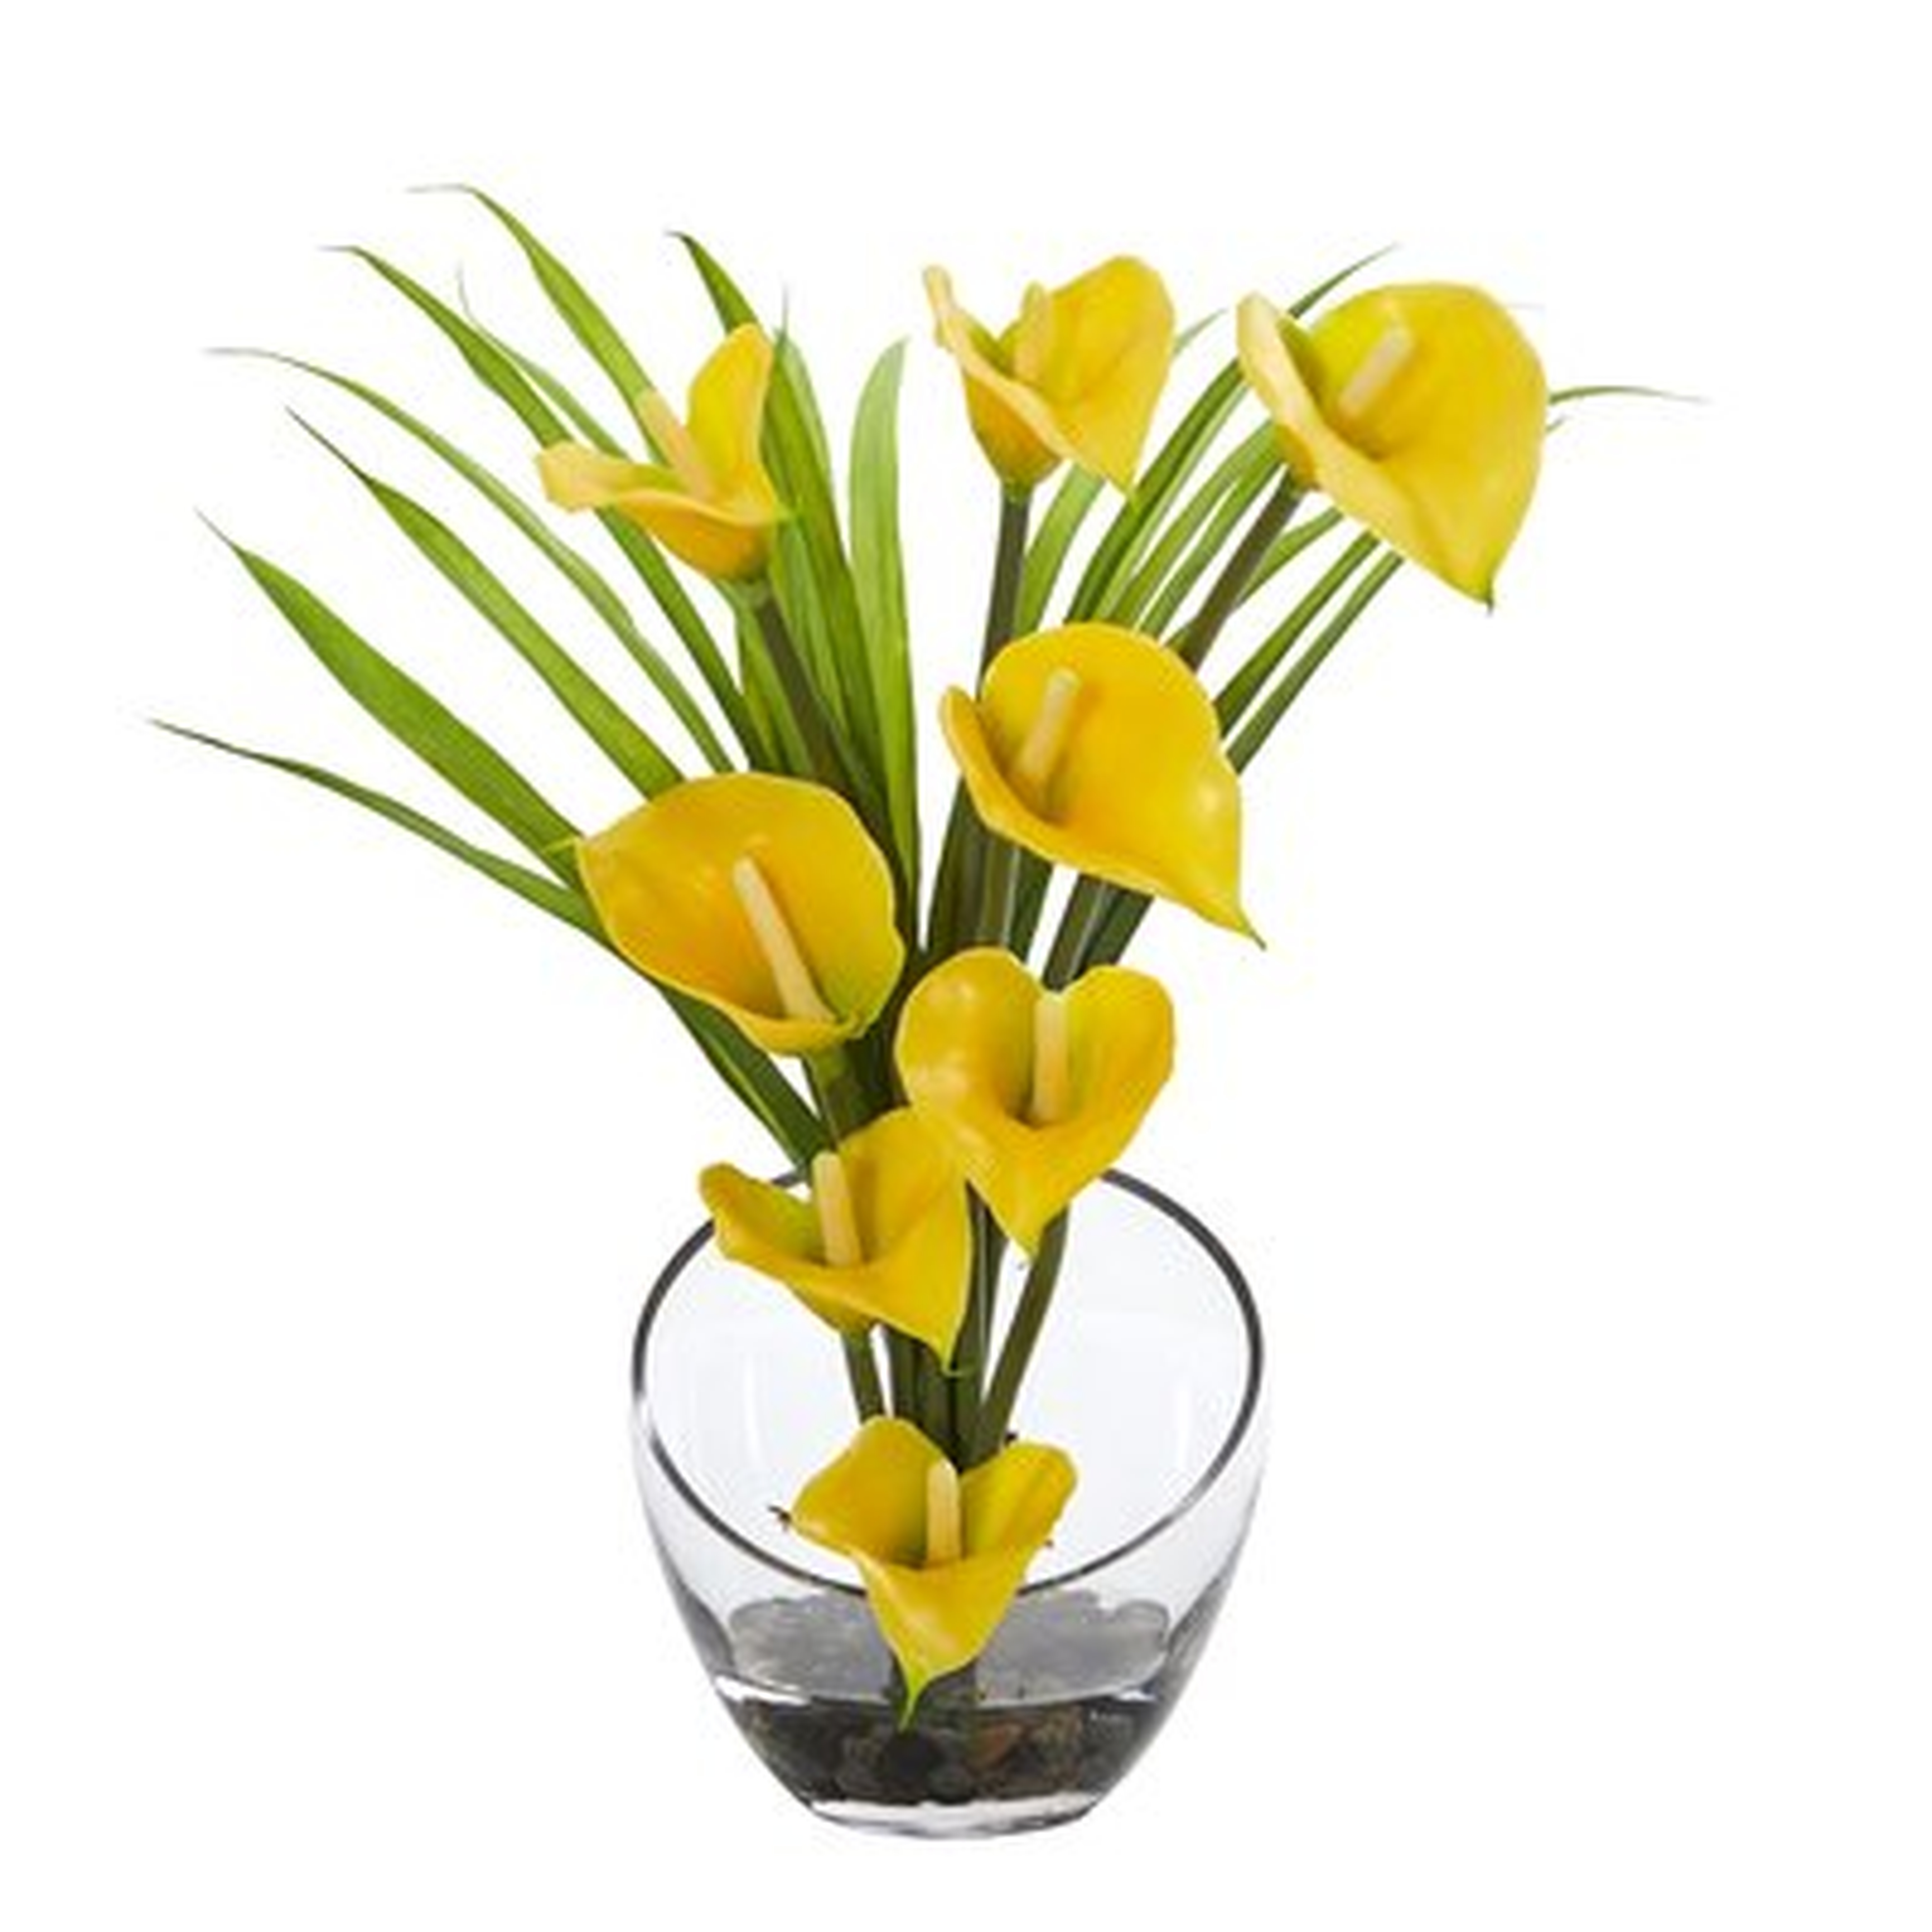 Calla Lily and Grass Artificial Floral Arrangement in Vase - Birch Lane